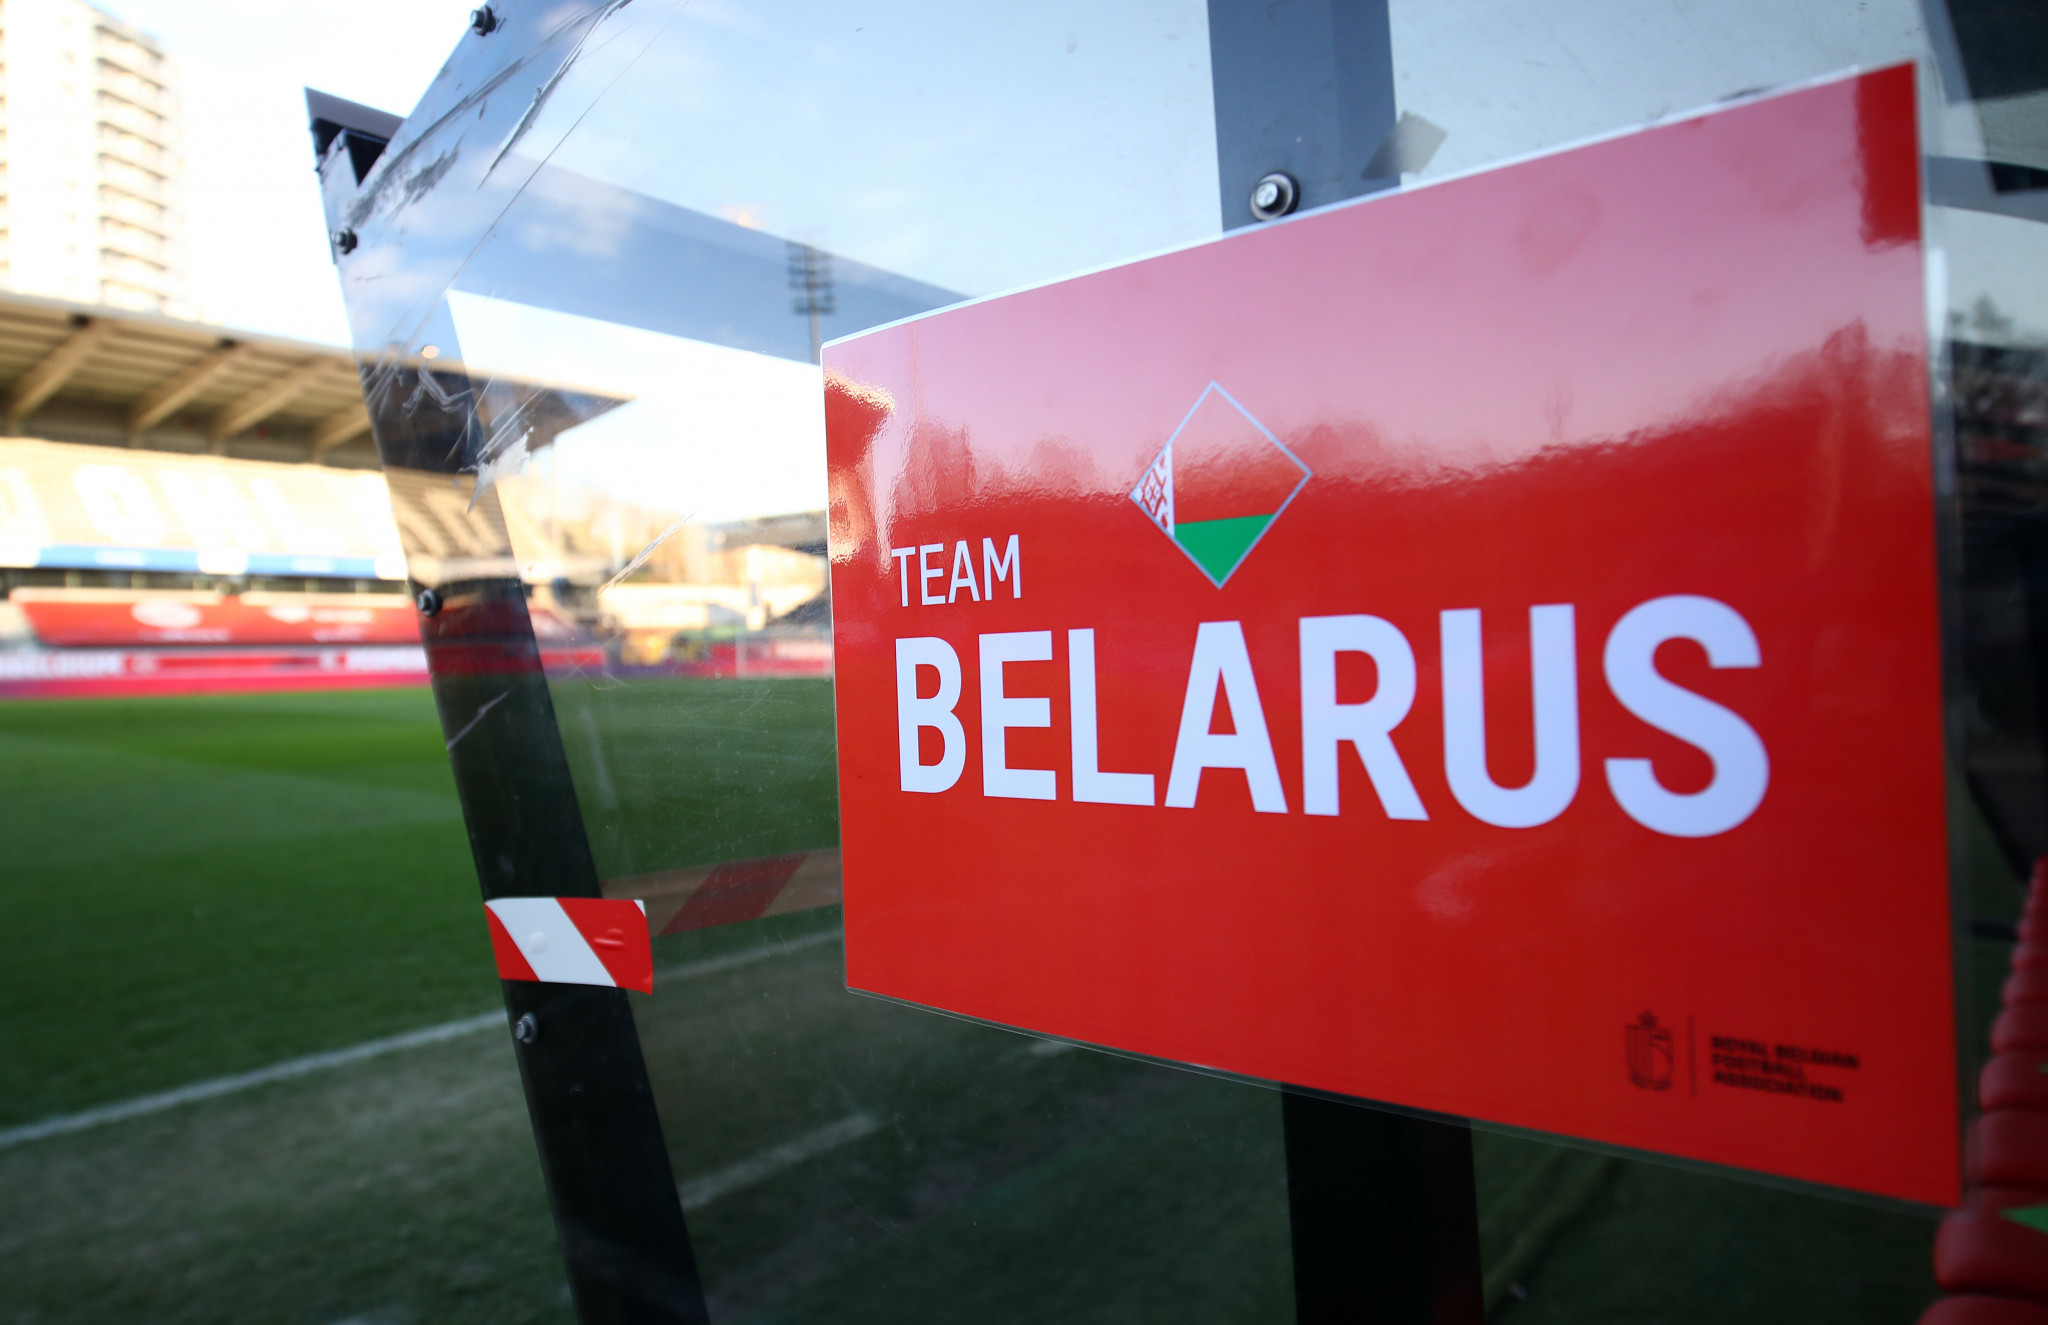 Teams from Belarus have not yet been banned from UEFA competitions ©Getty Images